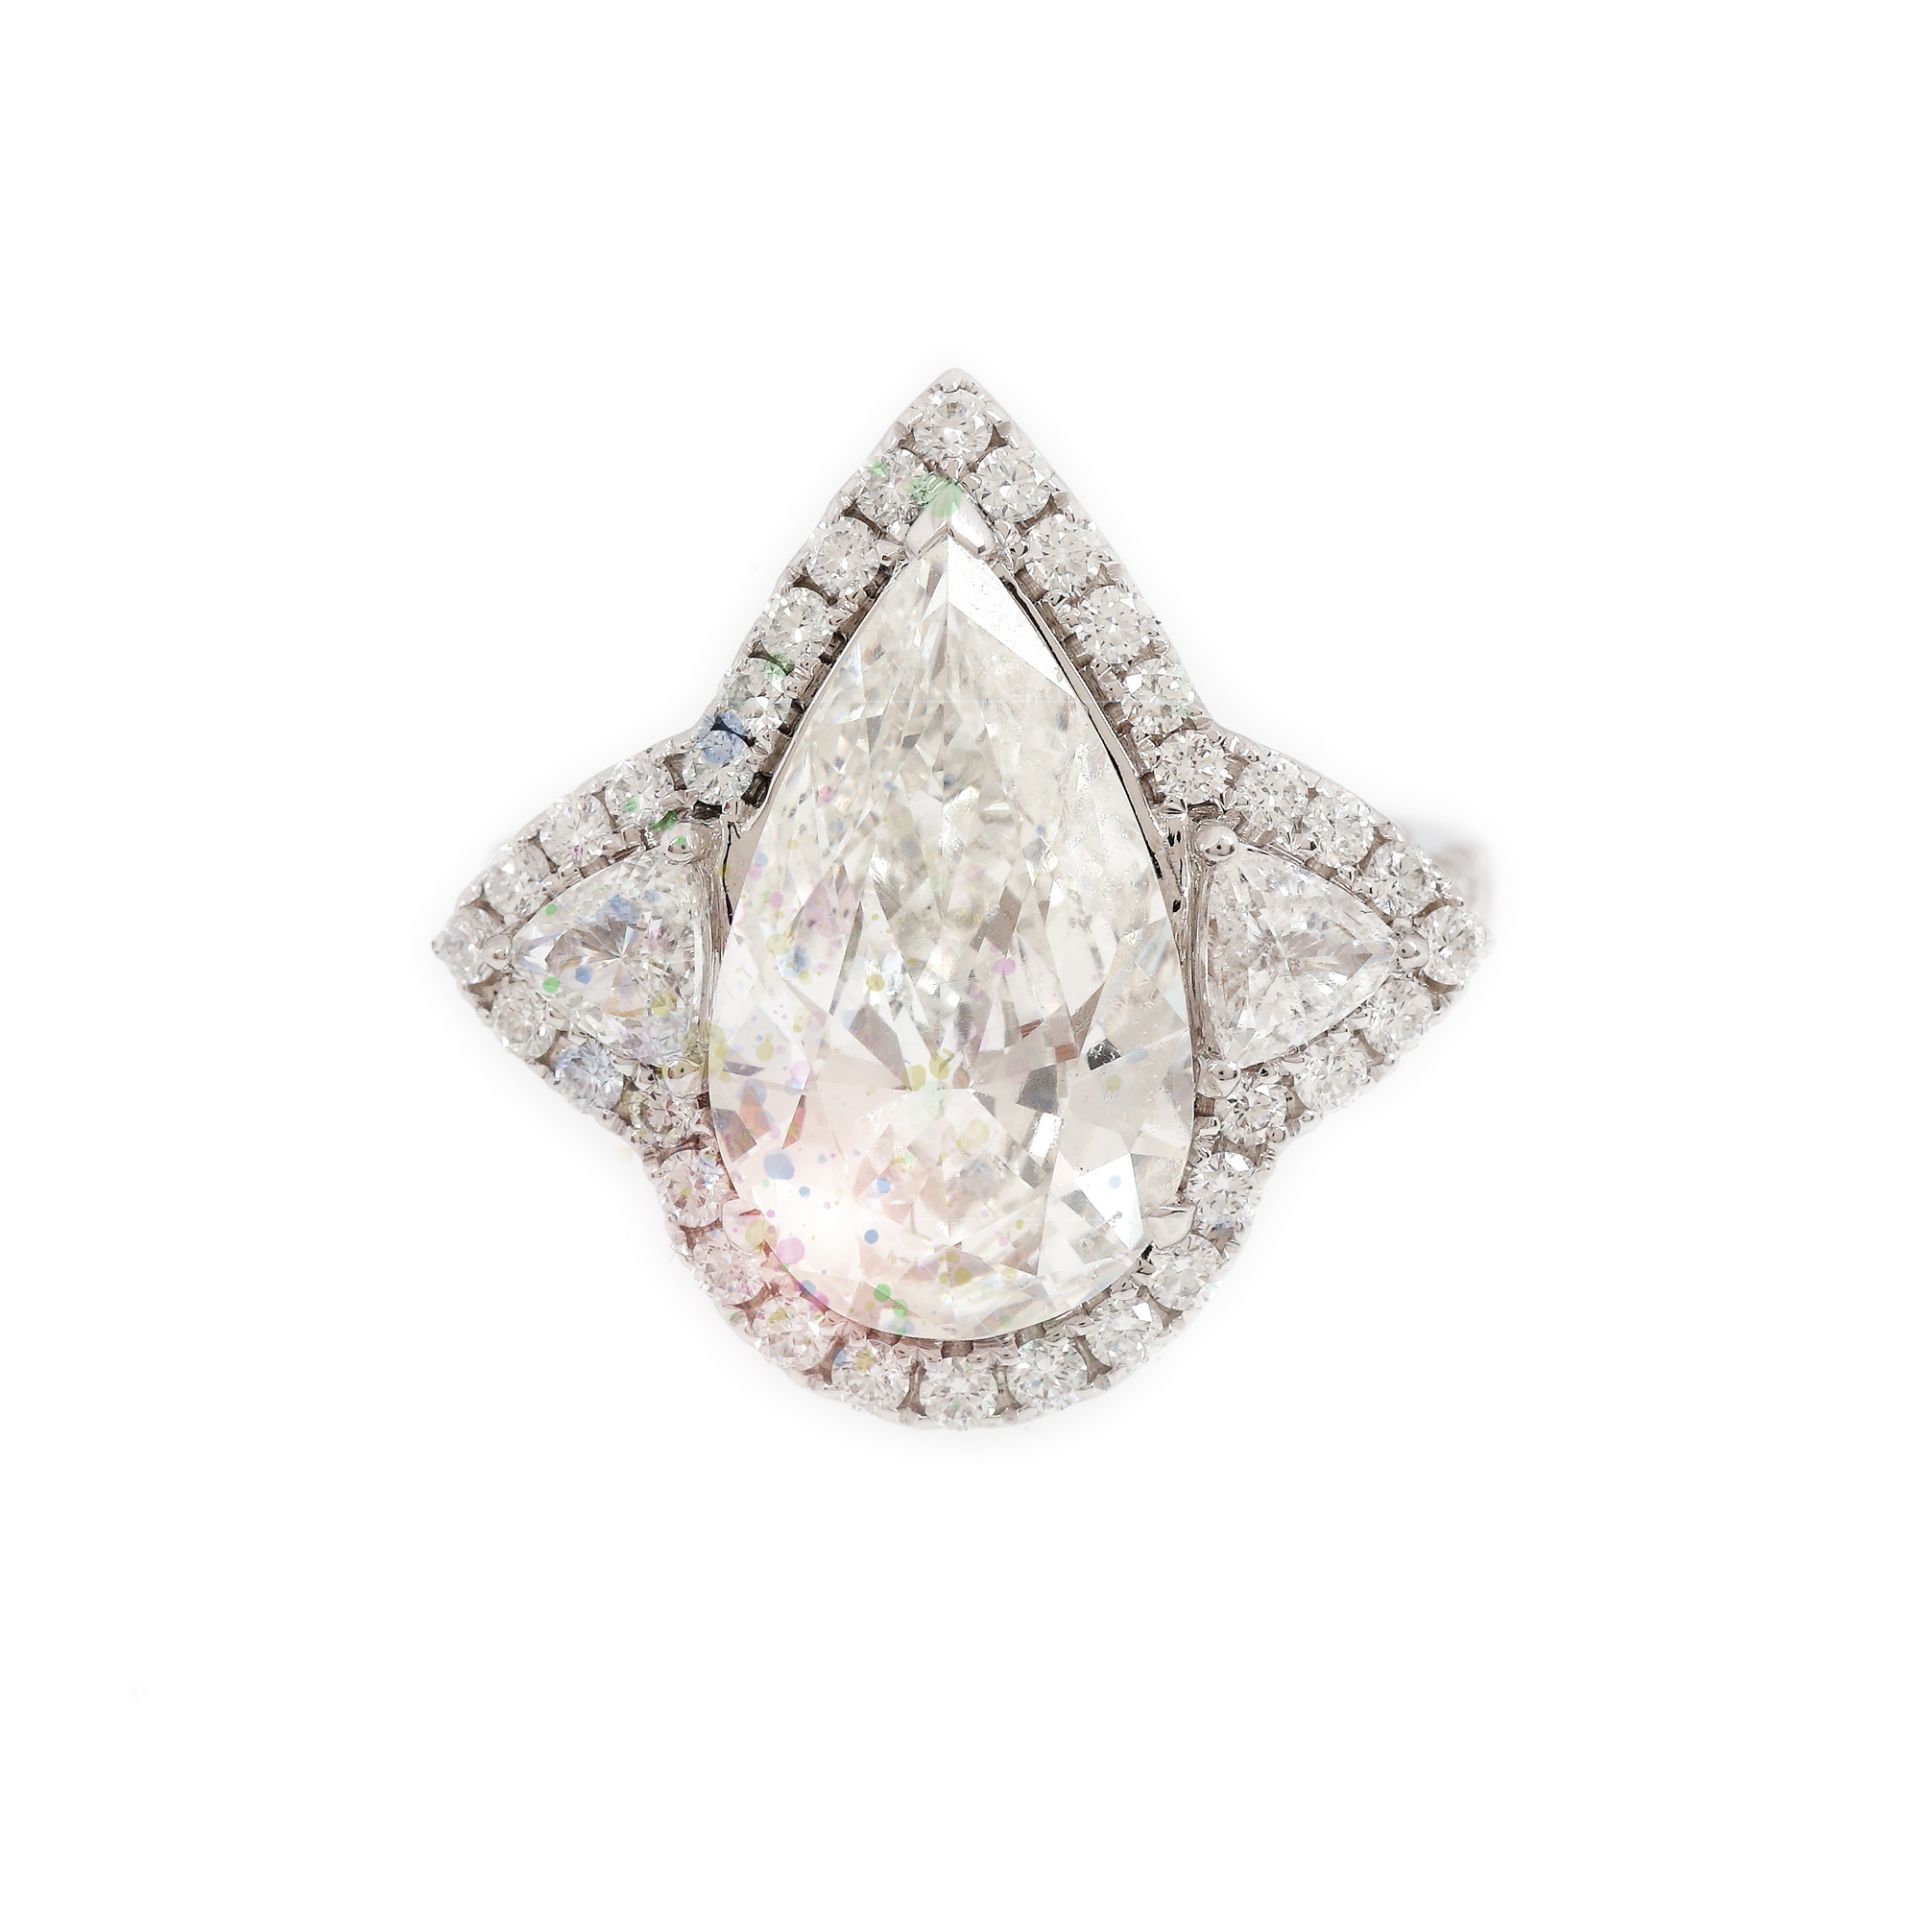 White gold ring, central pear shaped diamond, surrounded by trillion cut and brilliant diamonds